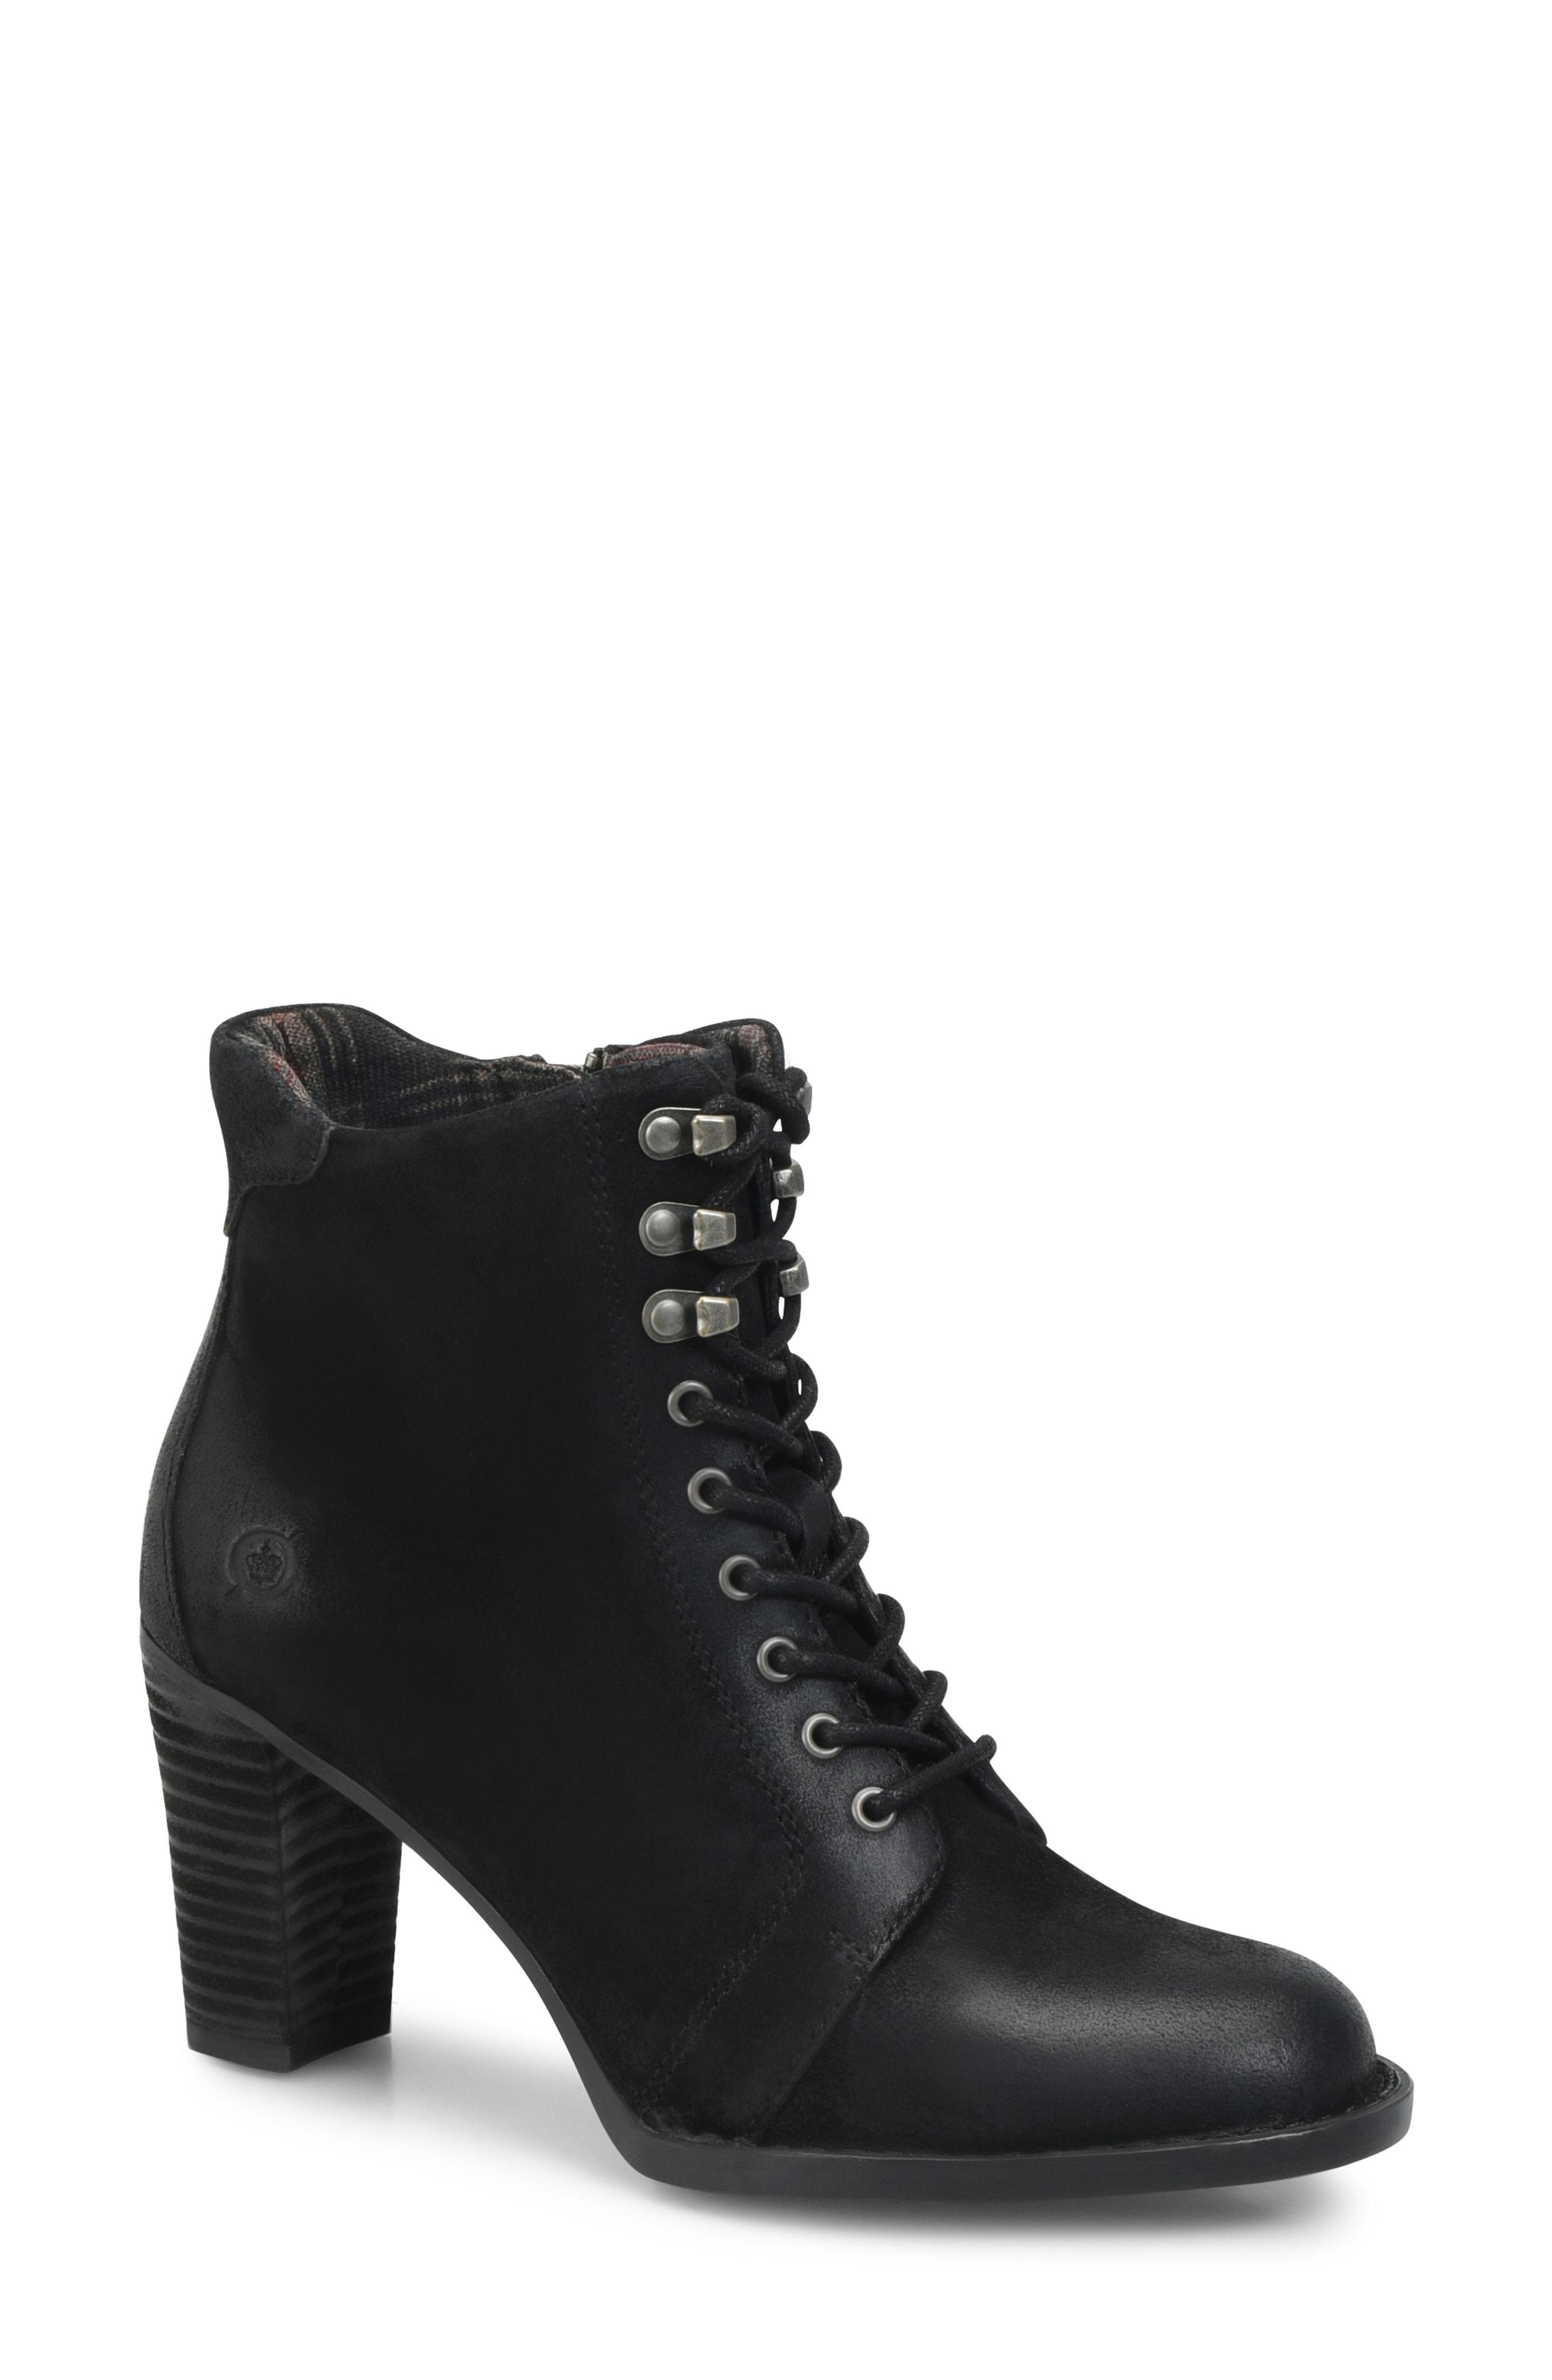 born lace up ankle boots